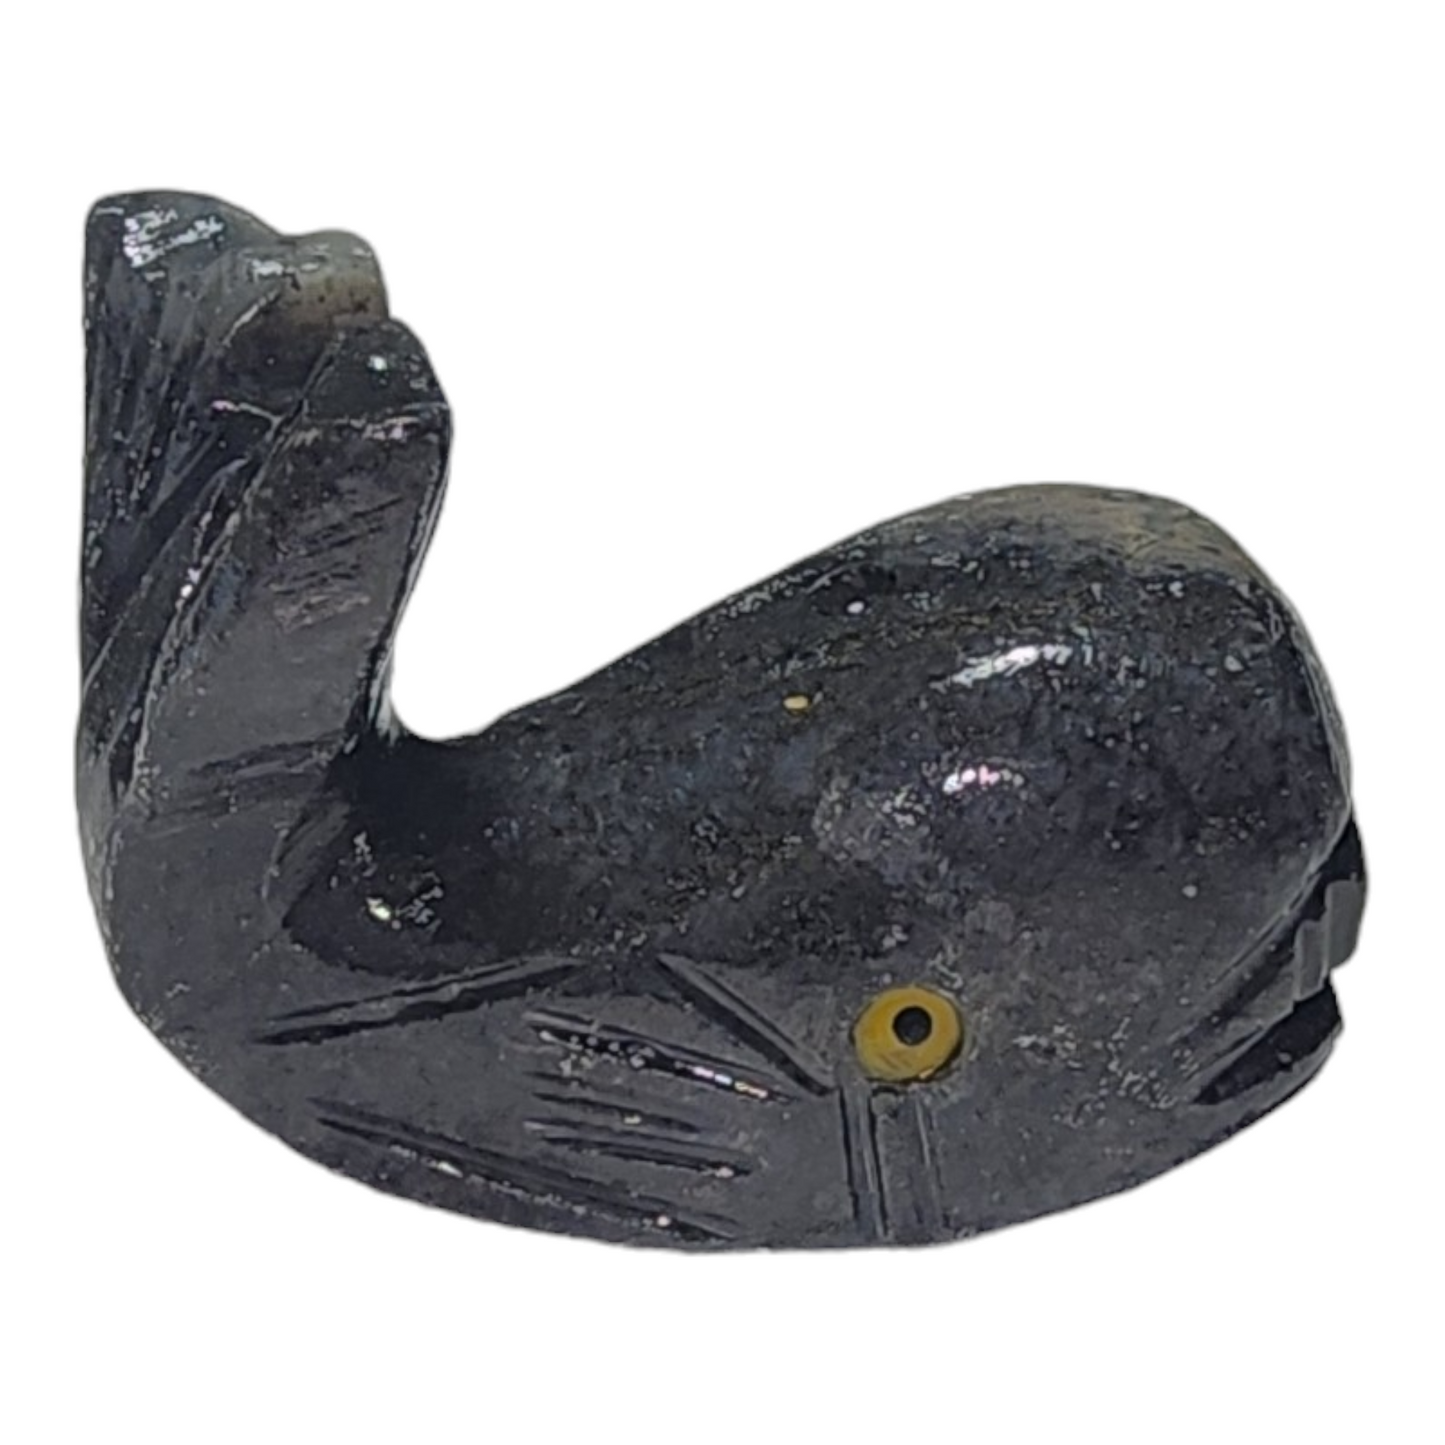 Hand Carved Peruvian Soapstone Whales